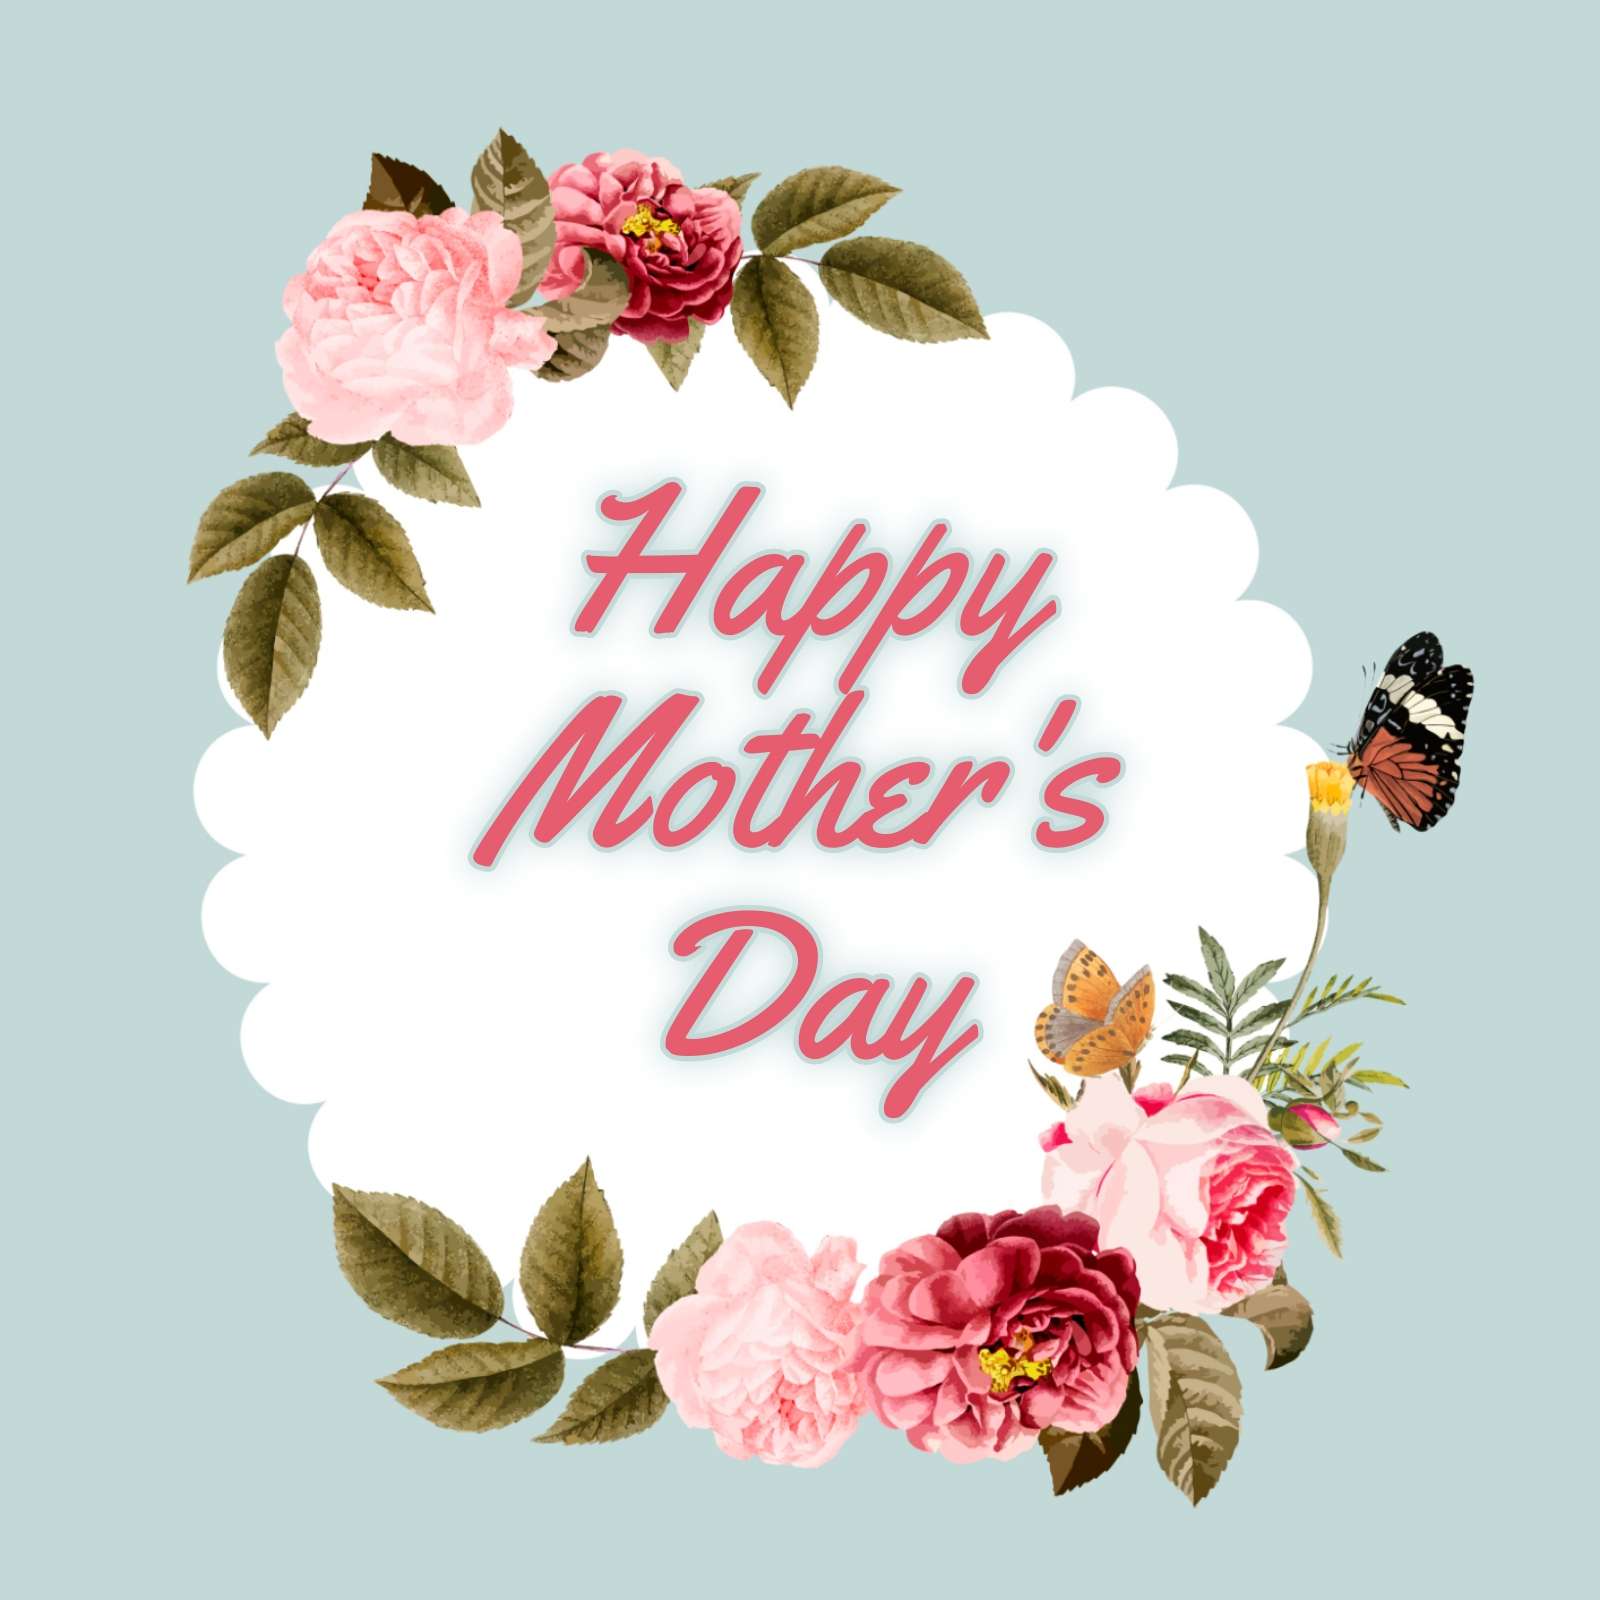 New Happy Mothers Day 2022 Images Hd Download